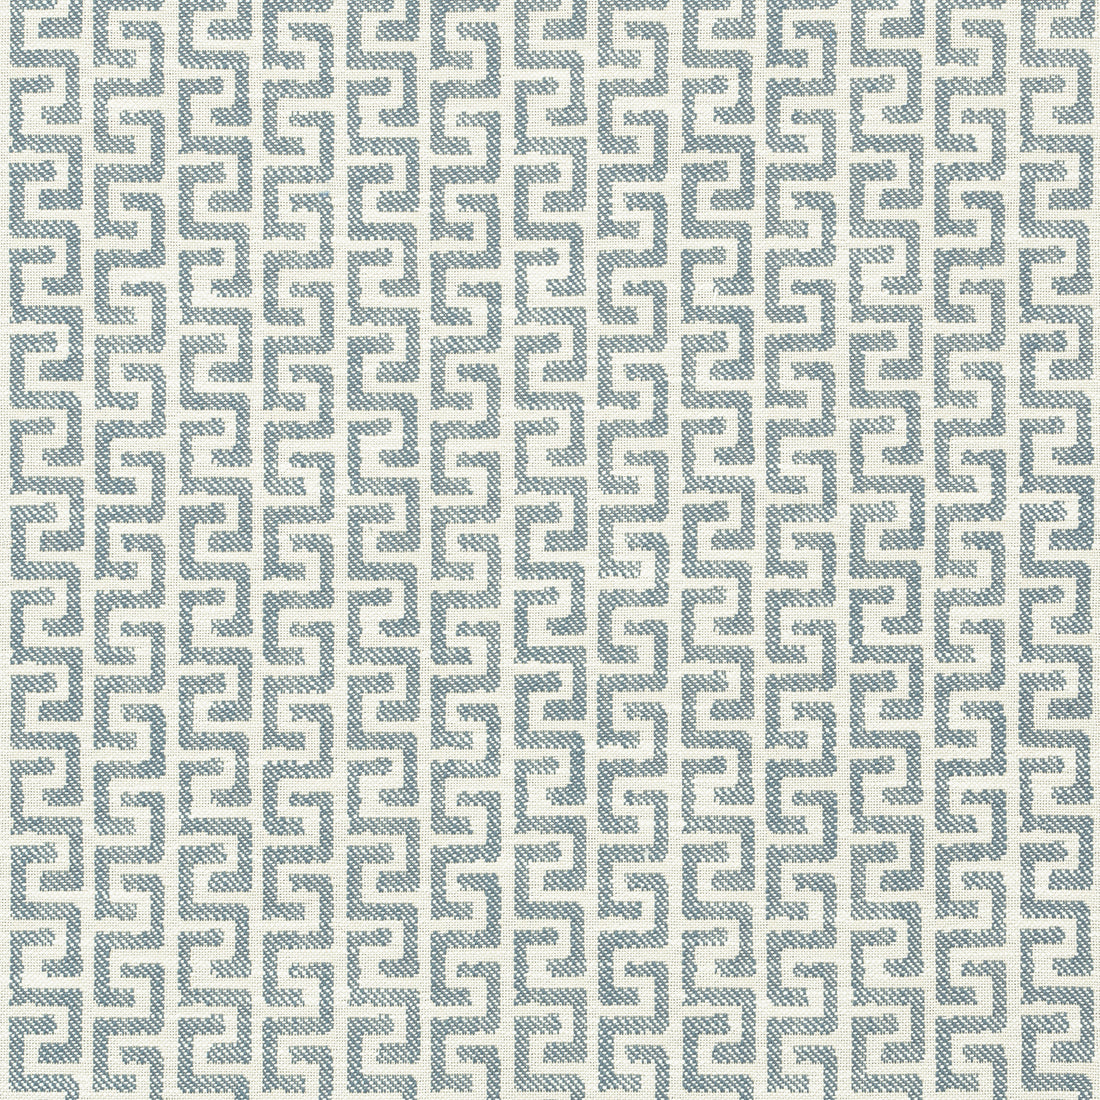 Merritt fabric in heron color - pattern number W74245 - by Thibaut in the Passage collection